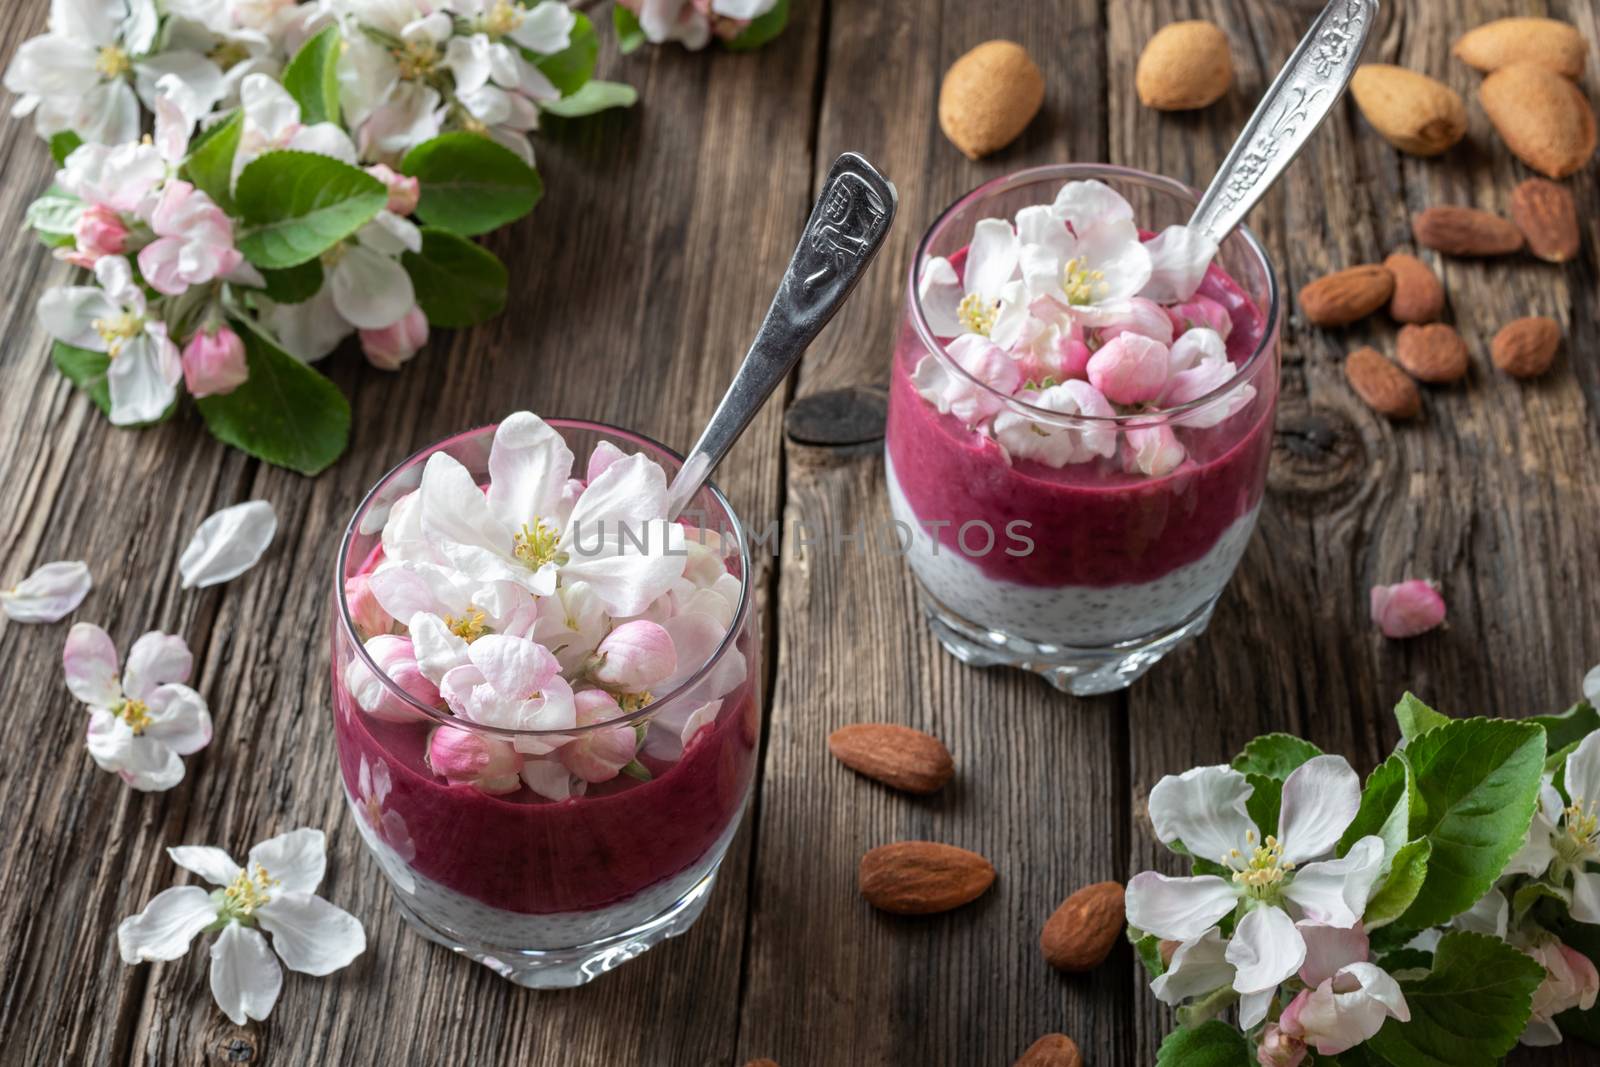 Layered chia pudding with almond milk, yogurt, blueberries and apple blossoms